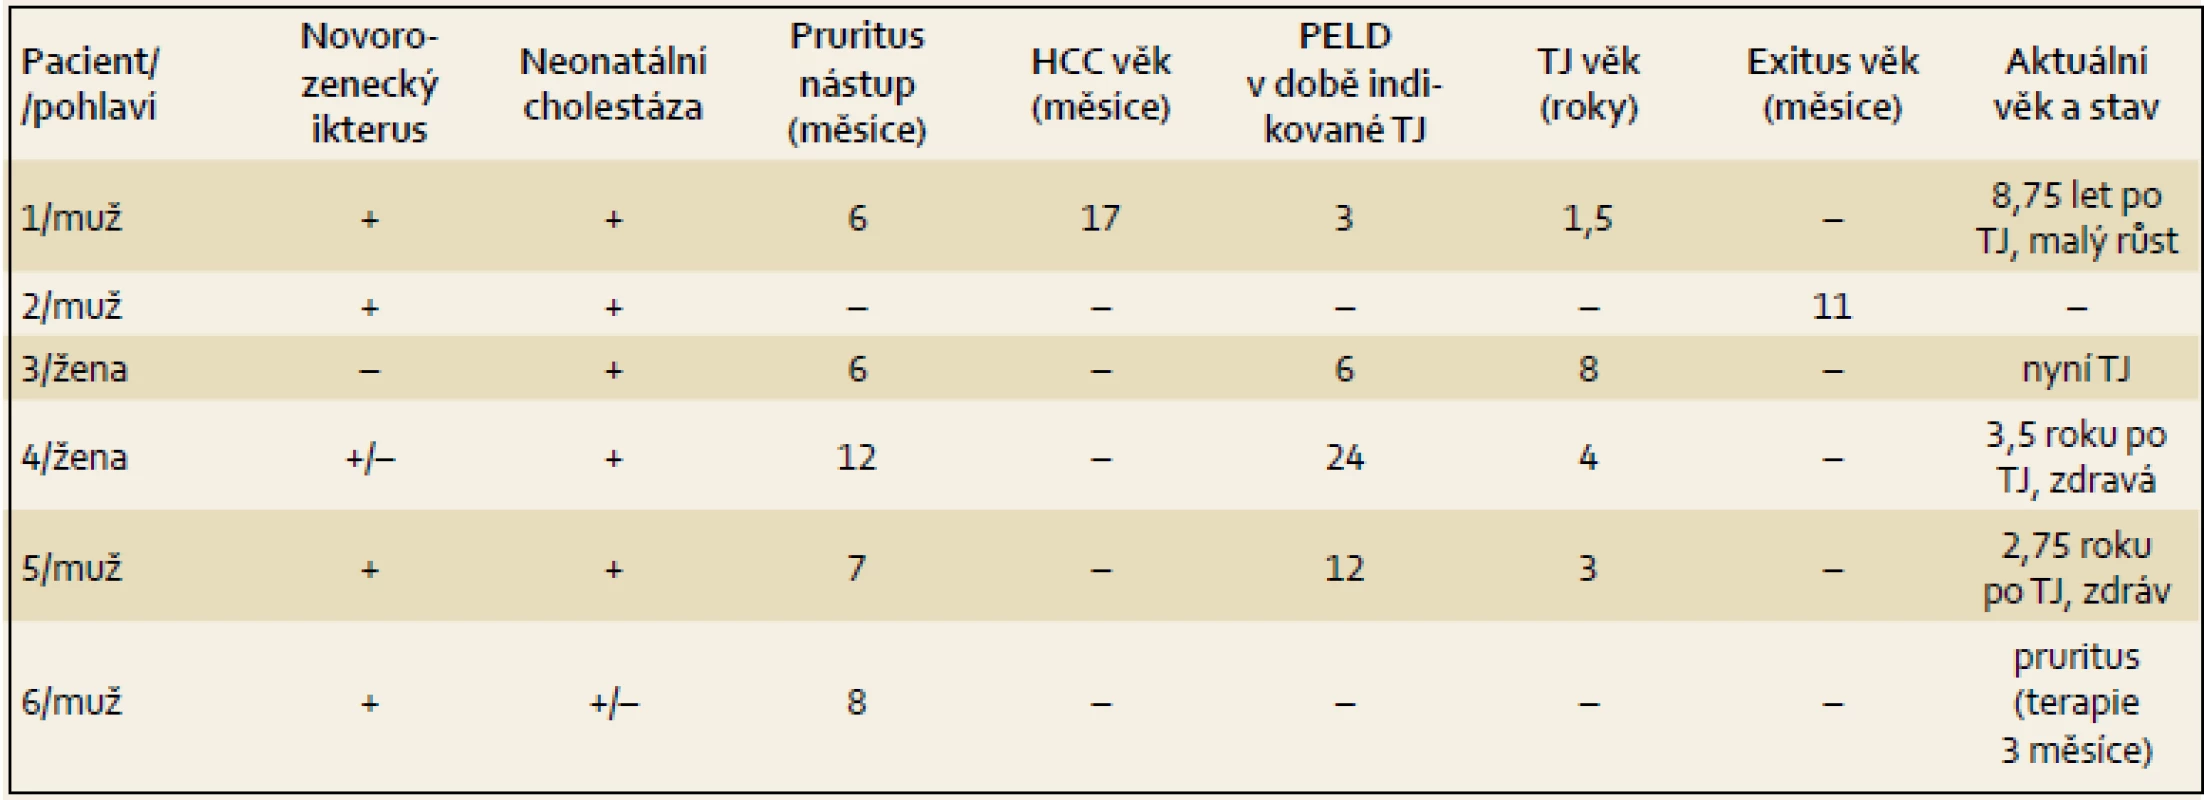 Klinická data pacientů s PFIC2.
Tab. 1. Clinical data of patients with PFIC2.